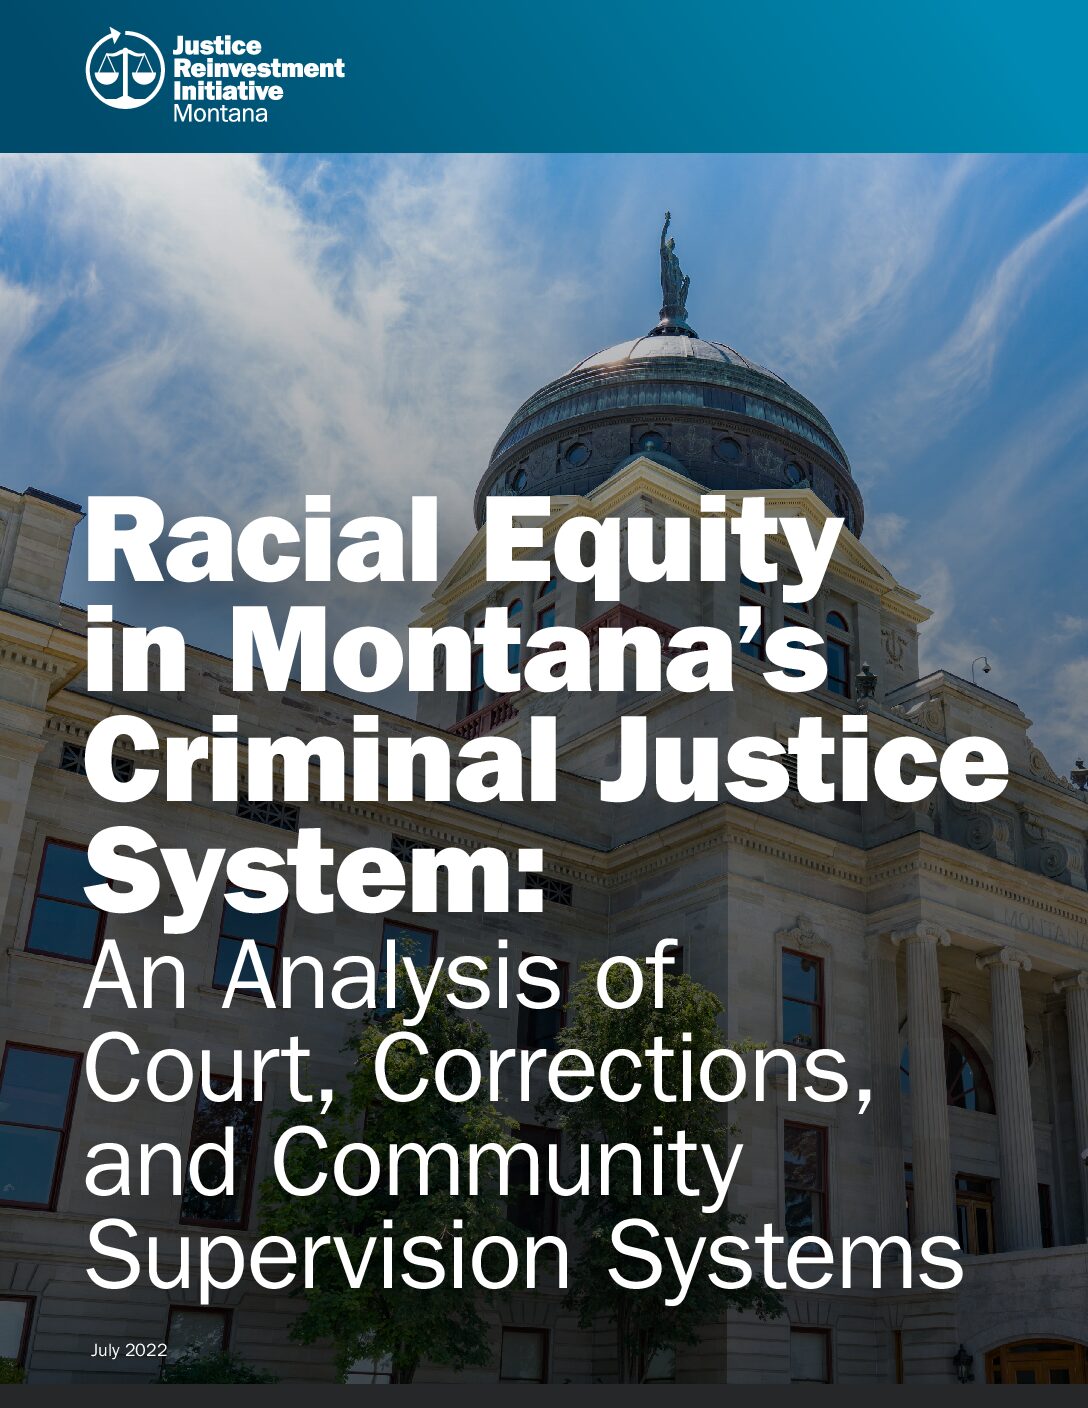 Racial Equity in Montana’s Criminal Justice System: An Analysis of Court, Corrections, and Community Supervision Systems